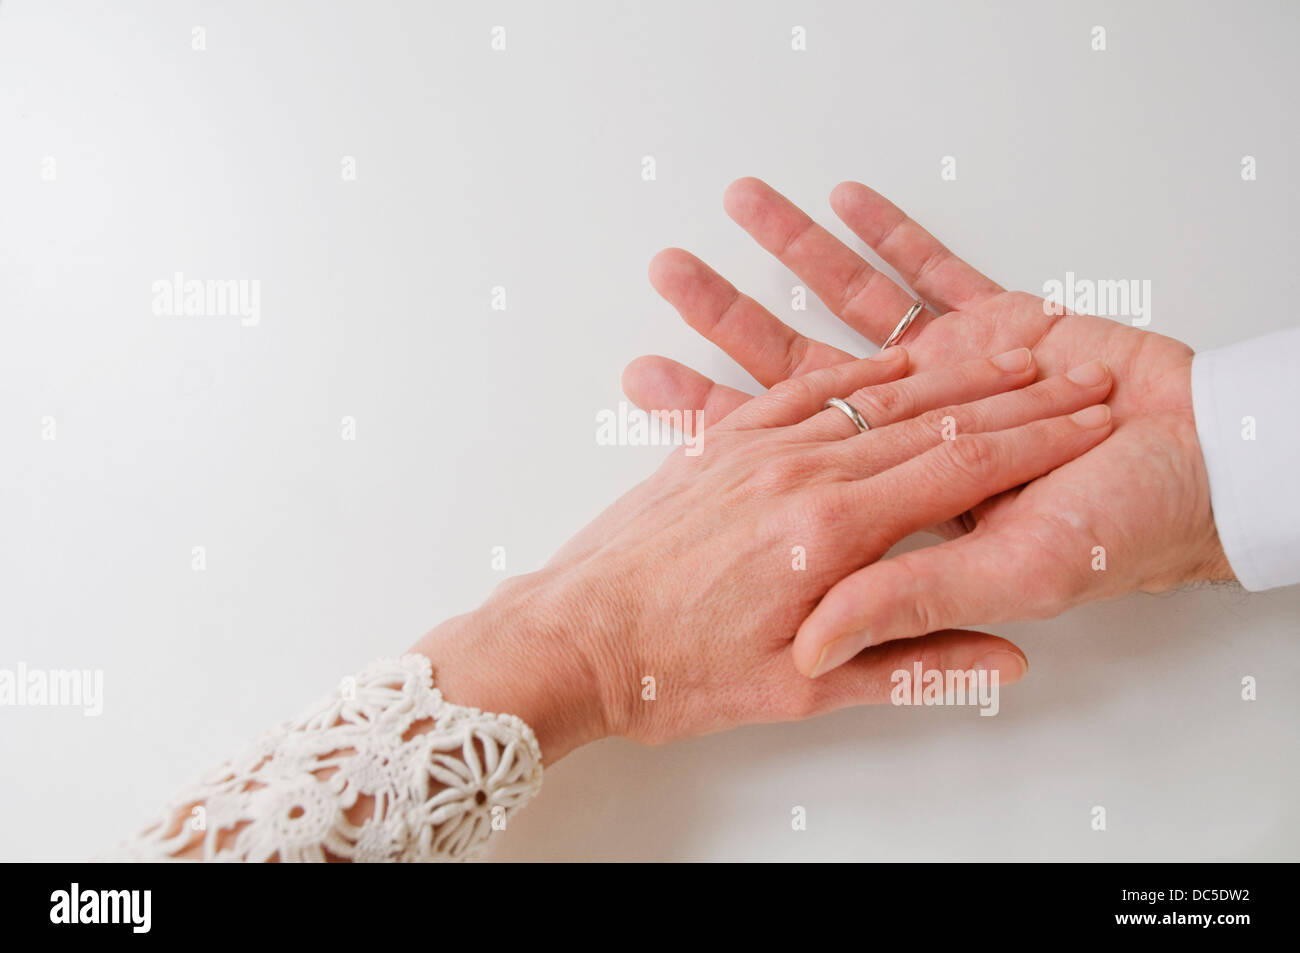 Mature couple's hands wearing wedding rings. Stock Photo